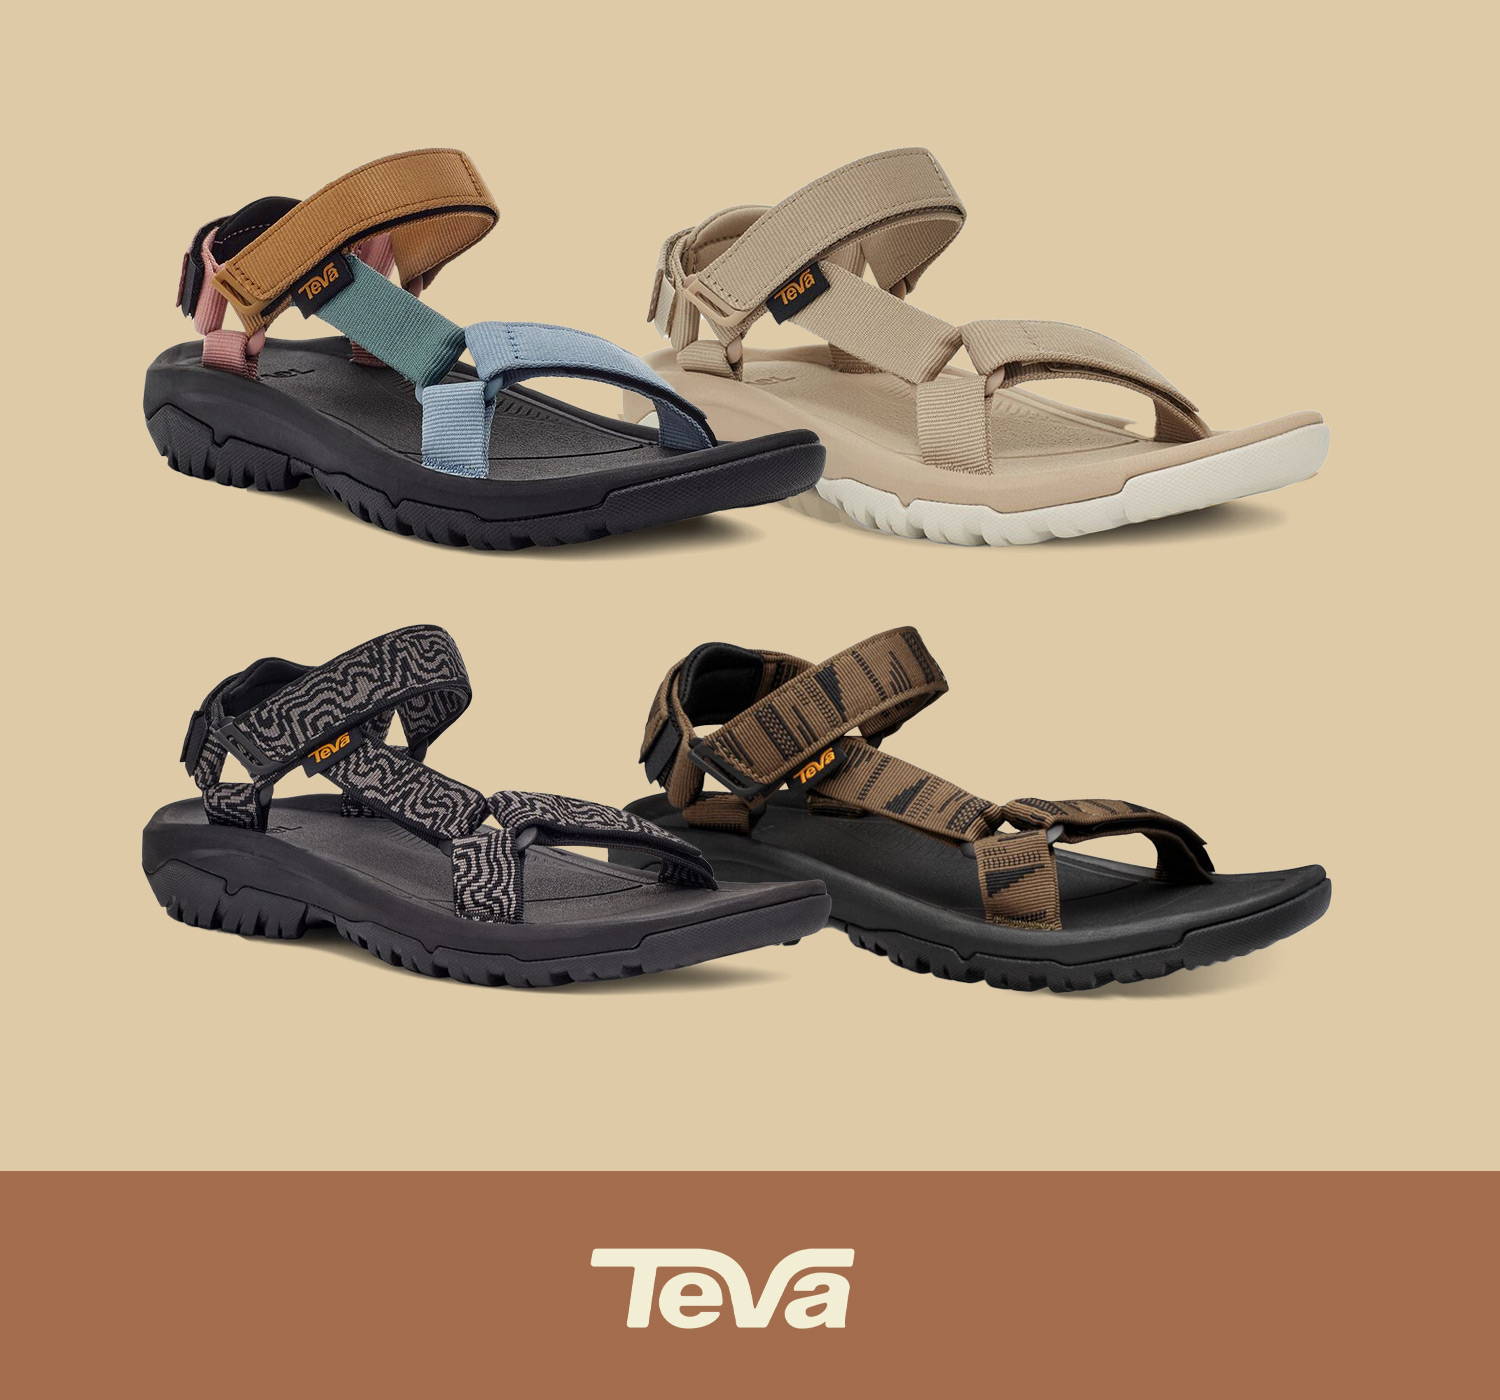 Rang supplere episode A Brief Look At The Footwear Brand, Teva | Shoe Palace Blog